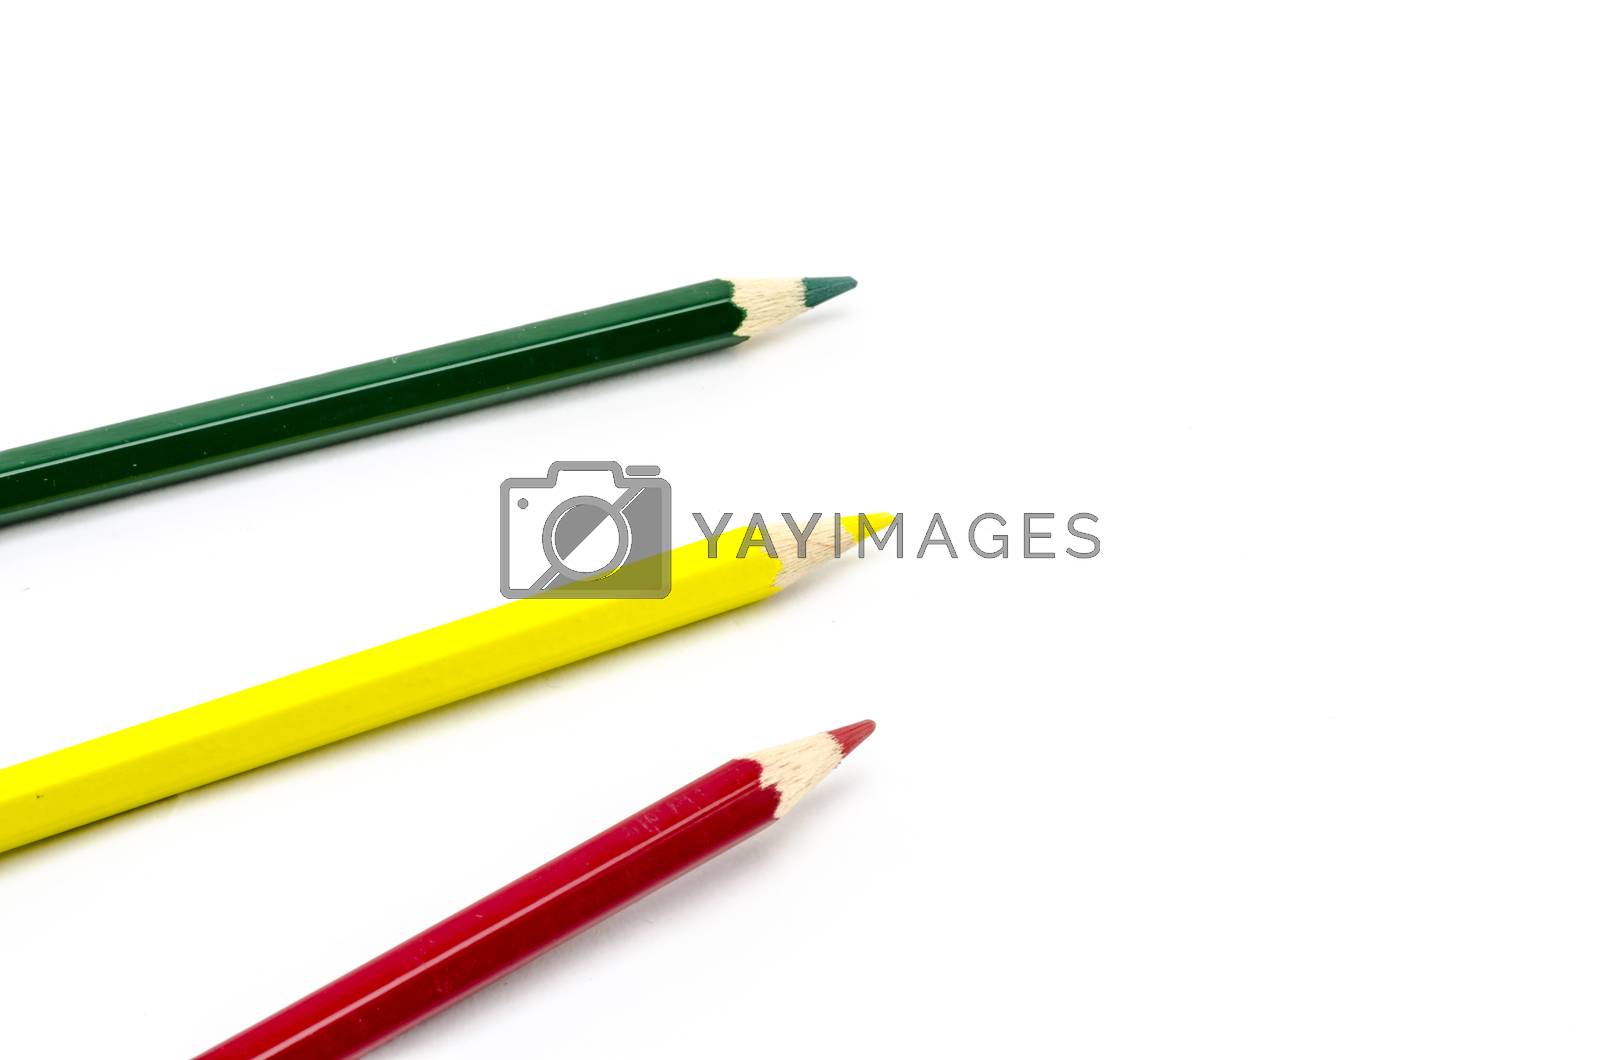 Royalty free image of color pencils isolated on white by ammza12